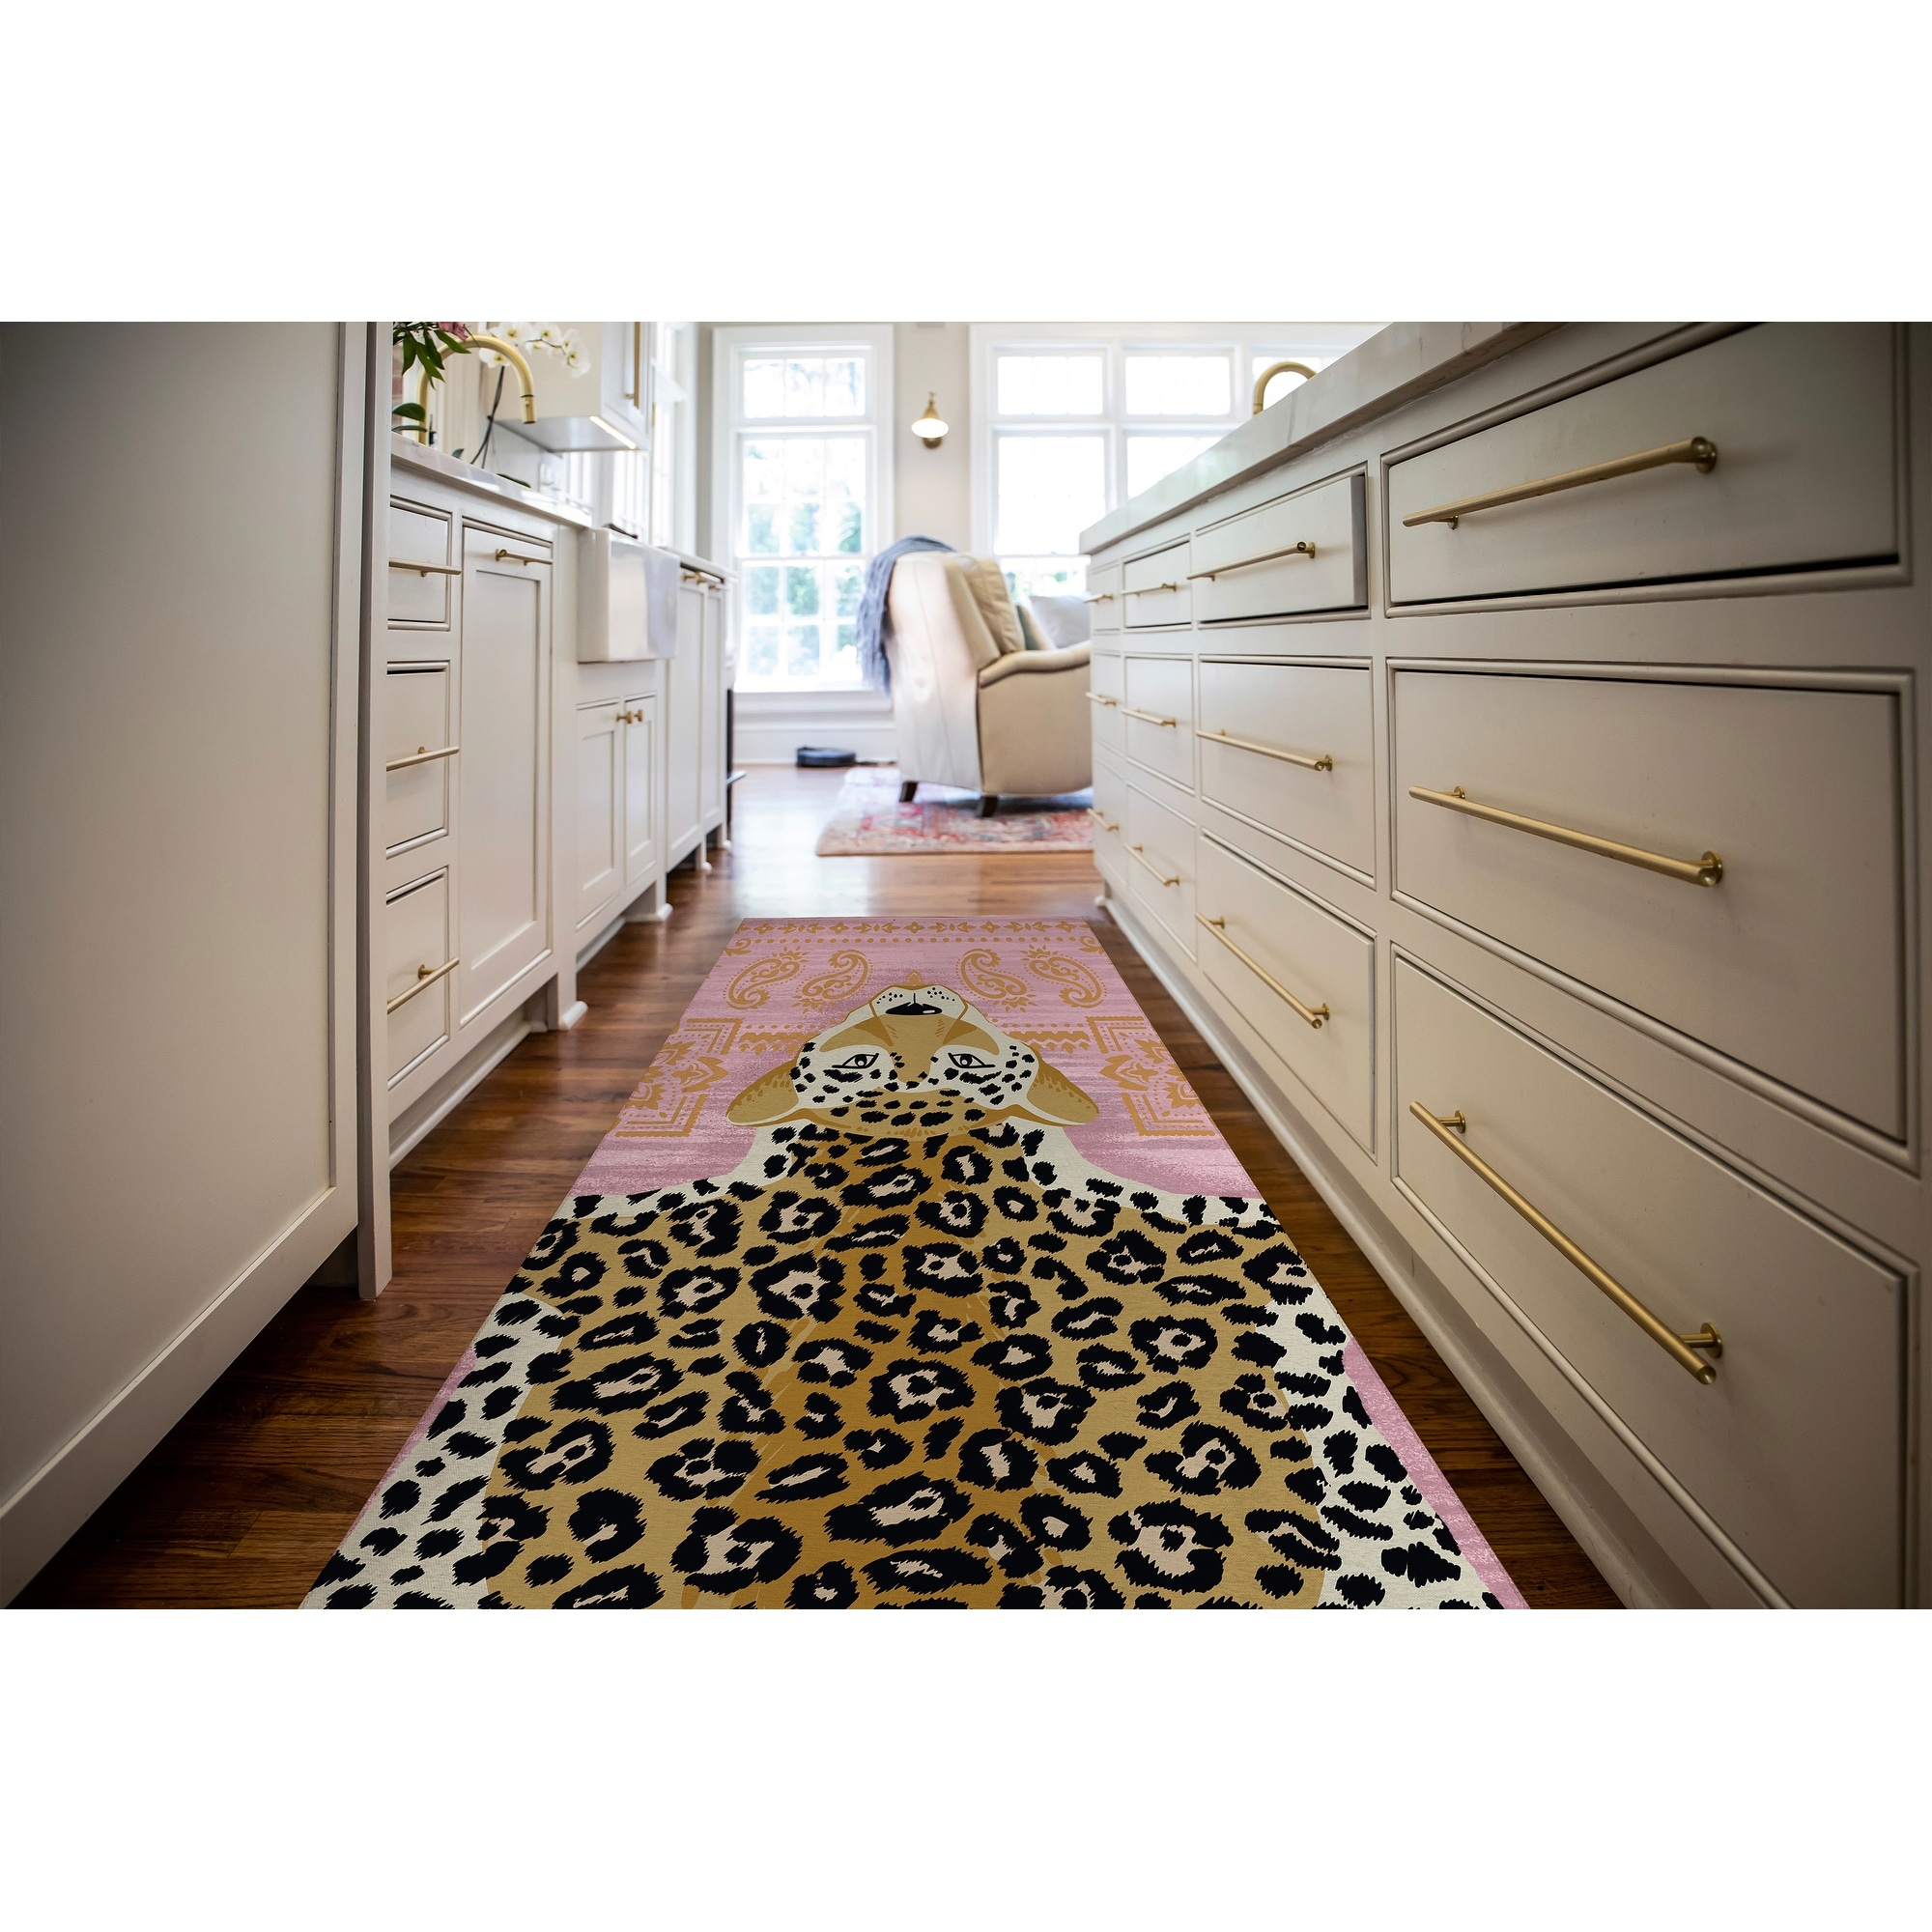 https://ak1.ostkcdn.com/images/products/is/images/direct/ae9e10b9dfa48c110fcf4dfe9ef0236296932434/LEOPARD-RUG-PINK-Kitchen-Mat-By-Kavka-Designs.jpg